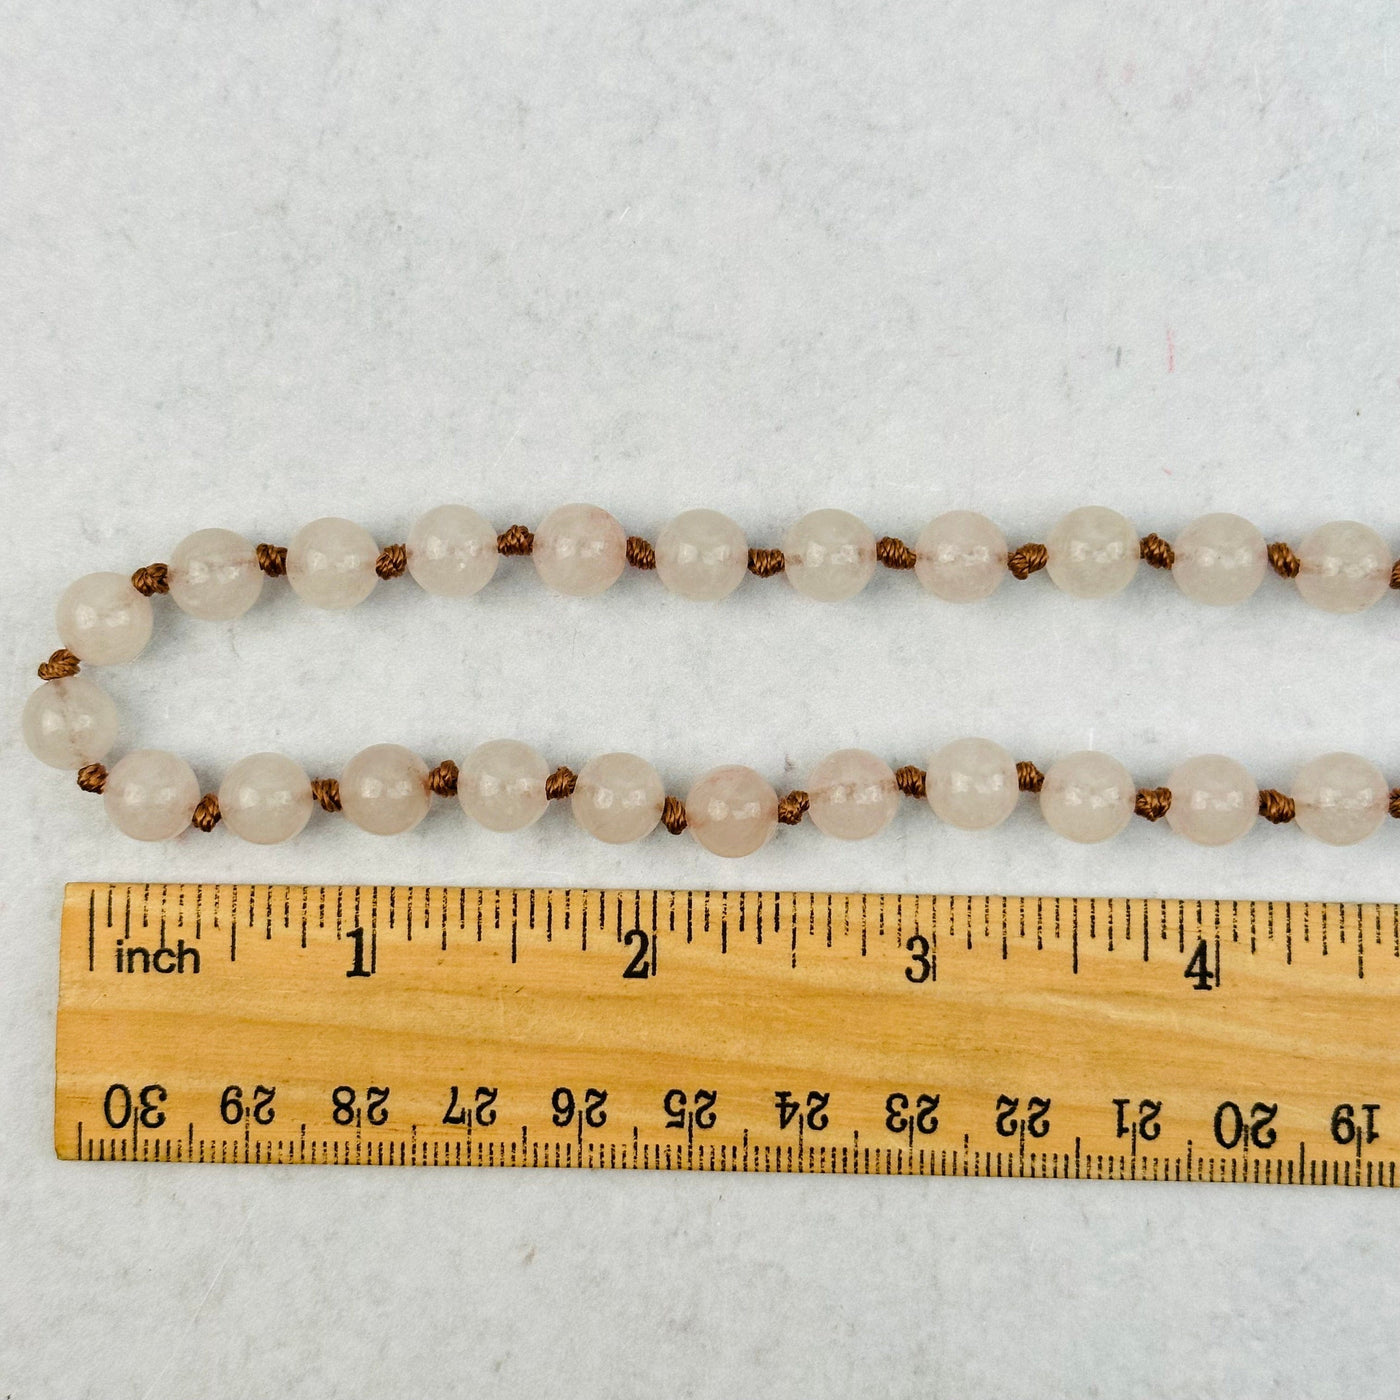 close up of the beads next to a ruler 